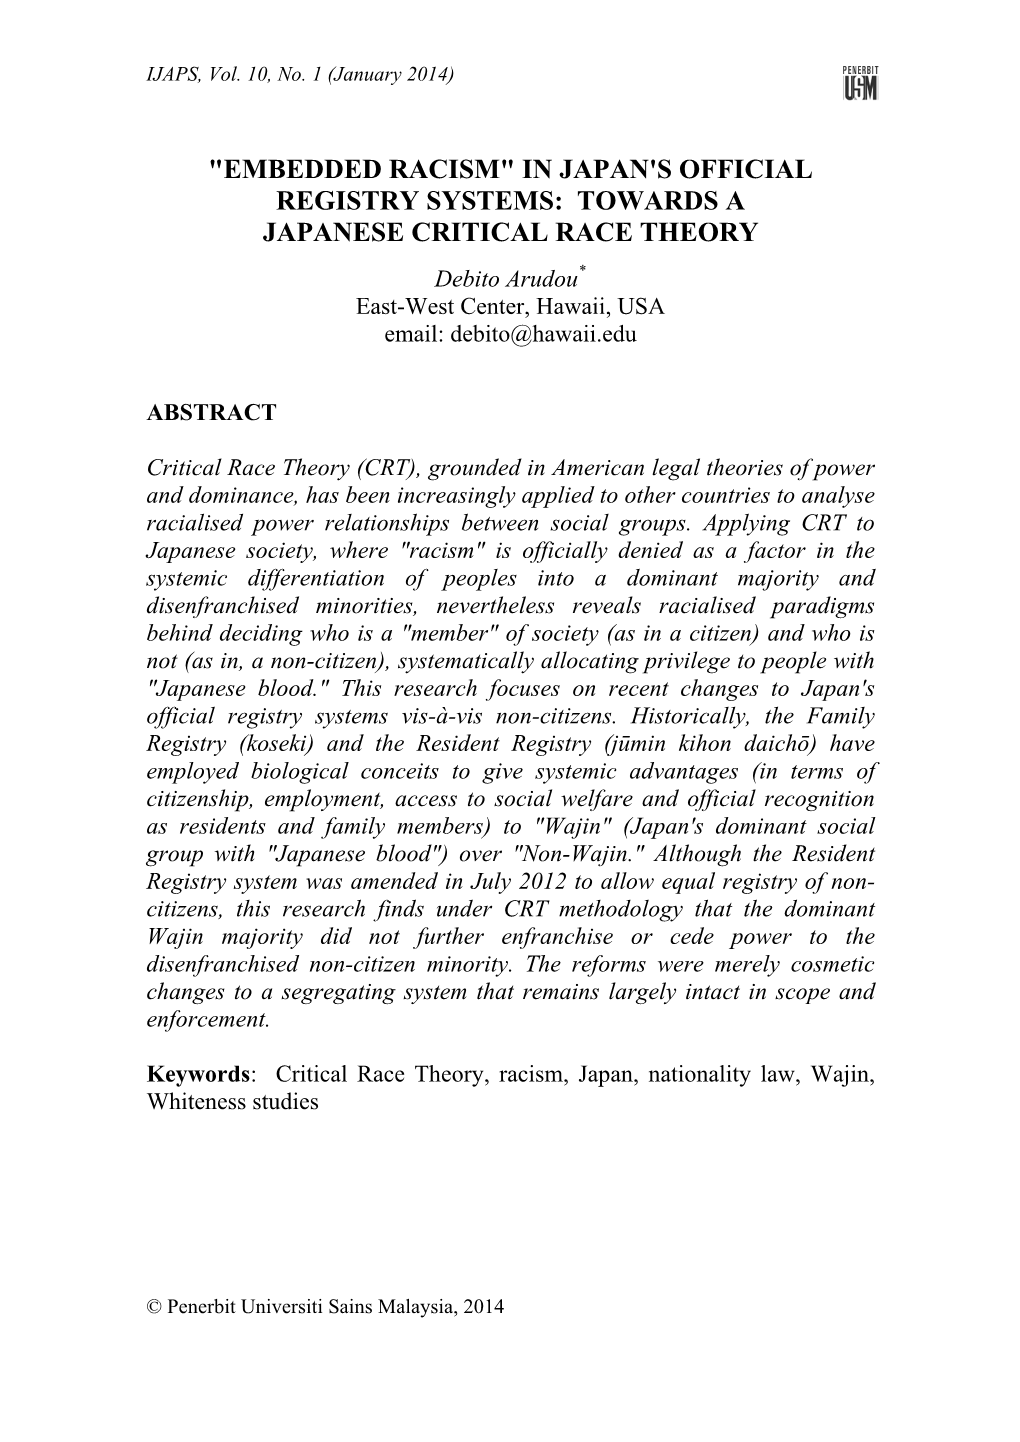 EMBEDDED RACISM" in JAPAN's OFFICIAL REGISTRY SYSTEMS: TOWARDS a JAPANESE CRITICAL RACE THEORY Debito Arudou* East-West Center, Hawaii, USA Email: Debito@Hawaii.Edu